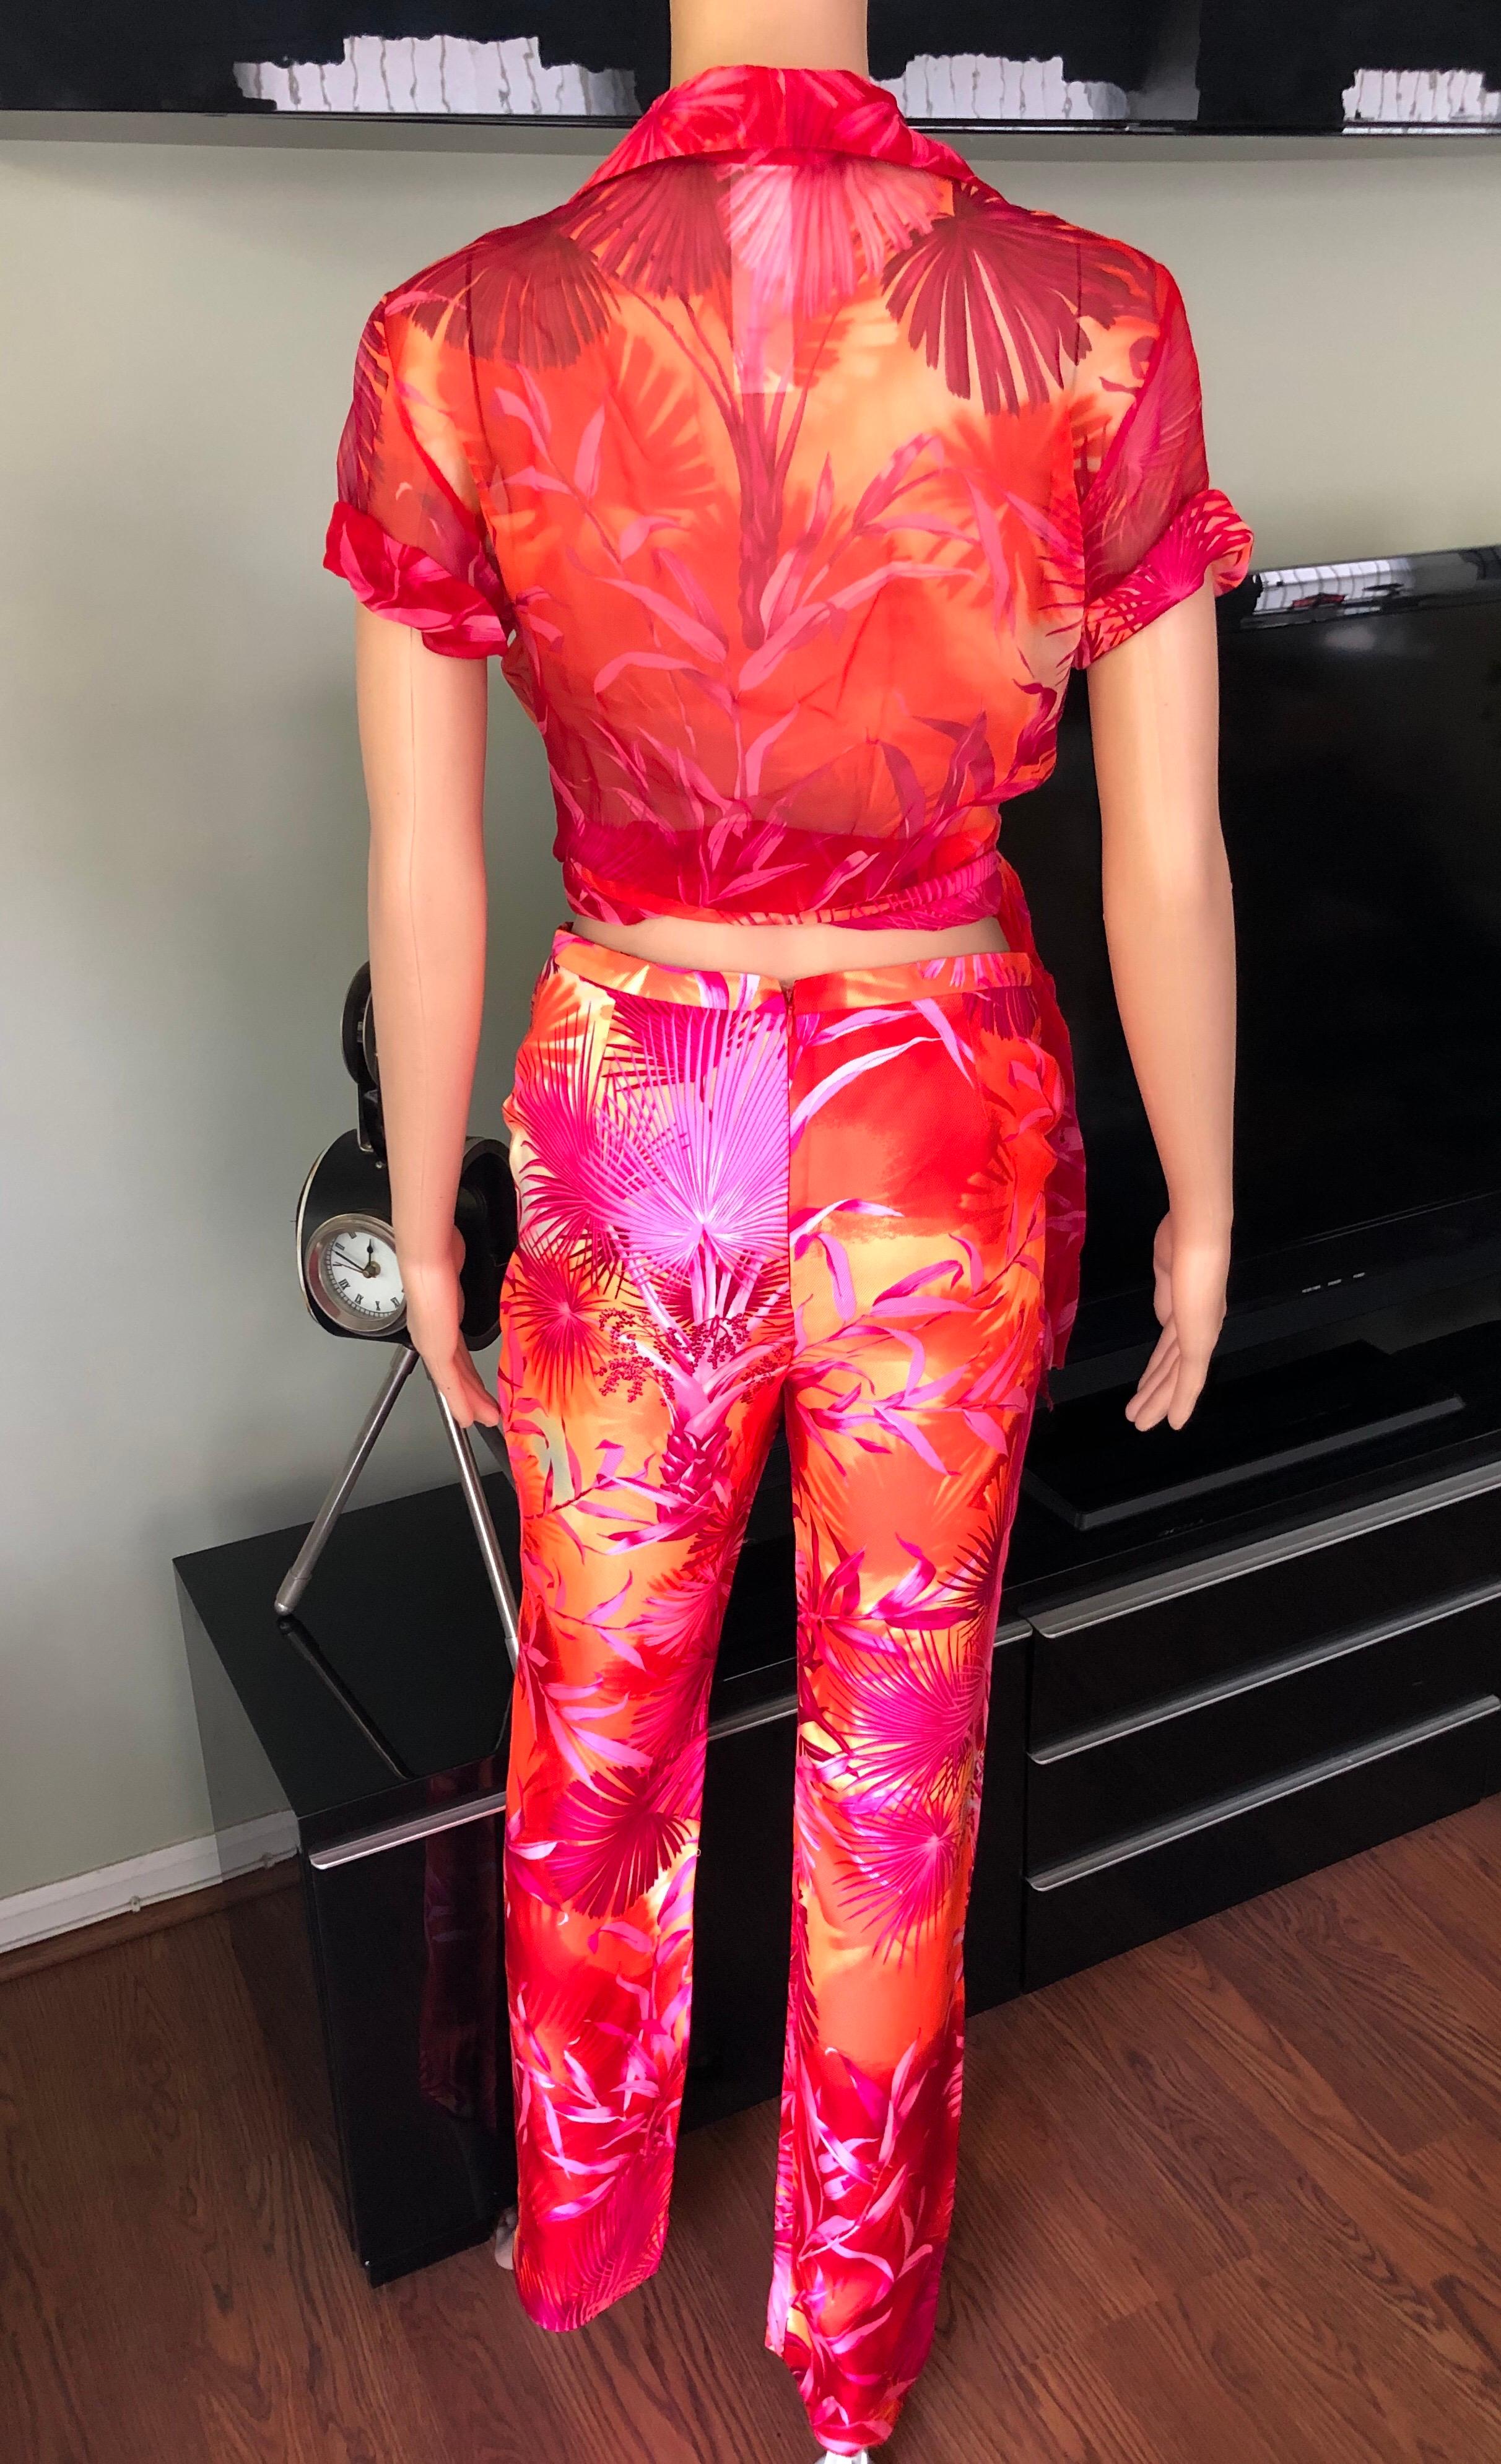 Red Gianni Versace S/S 2000 Runway Tropical Palm Print Pants & Blouse 2 Piece Set  For Sale